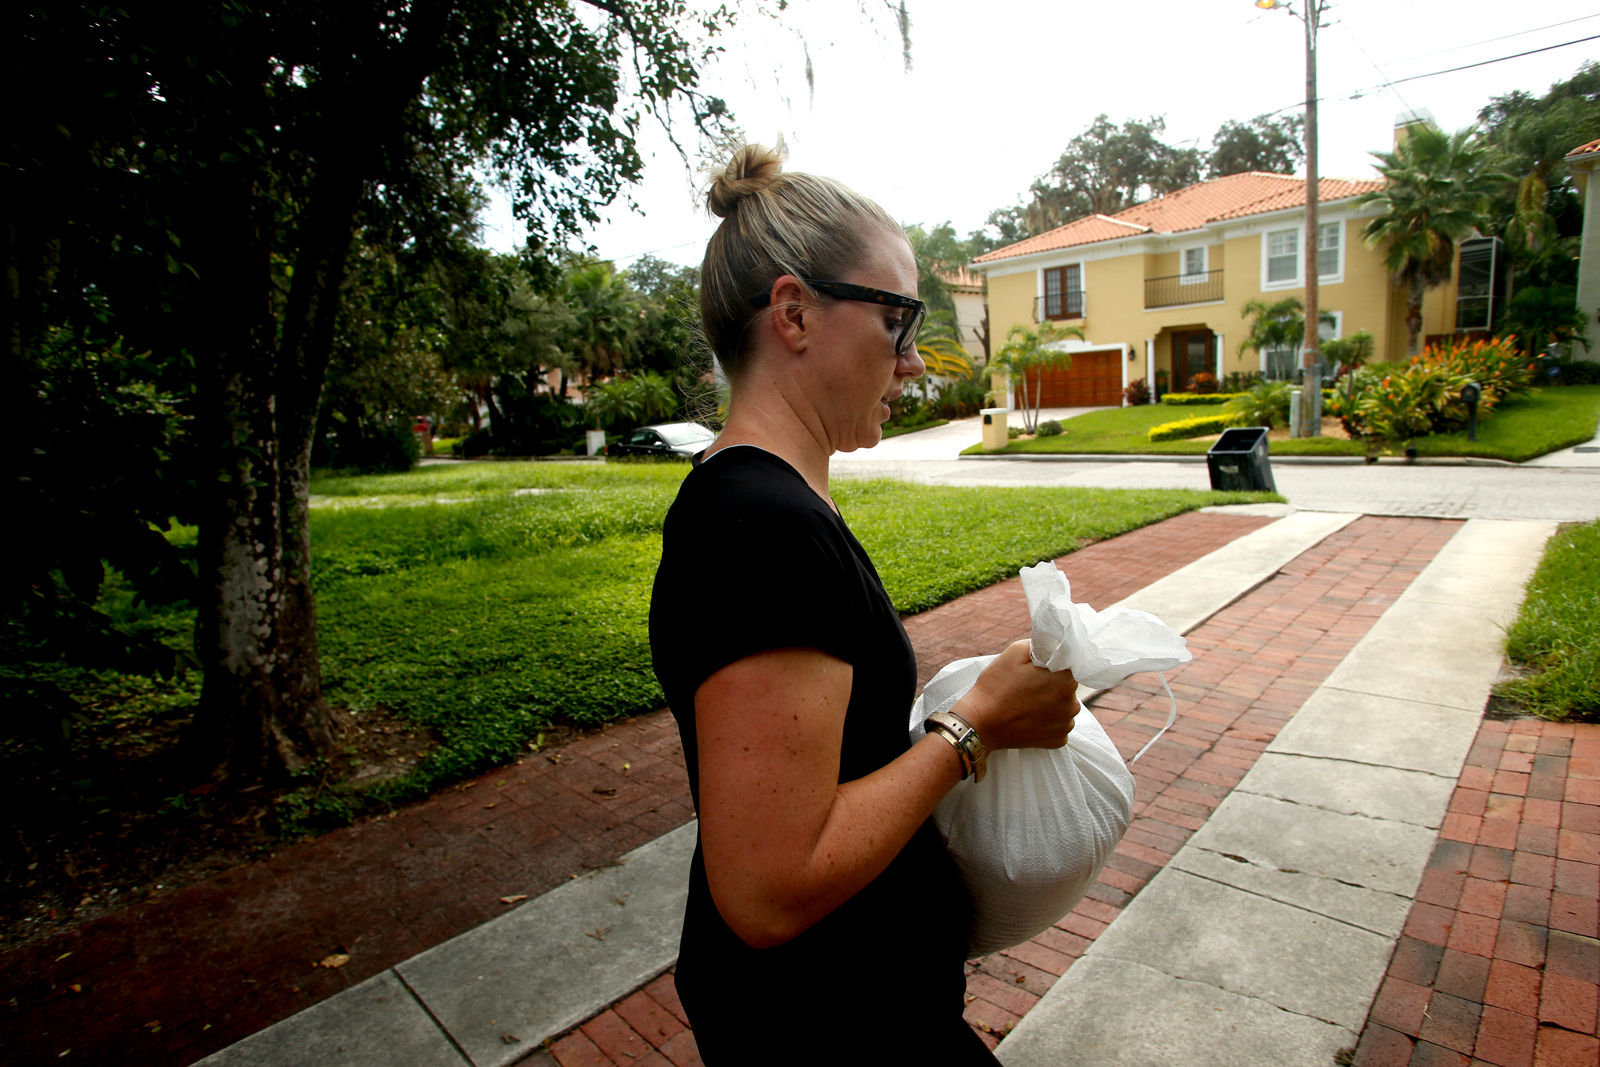 Kelly Harrington carries a sandbag to place in front of the front door of her new home as residents in the area prepare ahead of Hurricane Irma on September 5, 2017 in Tampa, Florida. The National Hurricane Center (NHC) has reported that  Hurricane Irma has strengthened to a Category 5 storm as it crosses into the Caribbean and is expected to move on towards Florida.  (Photo by Brian Blanco/Getty Images)